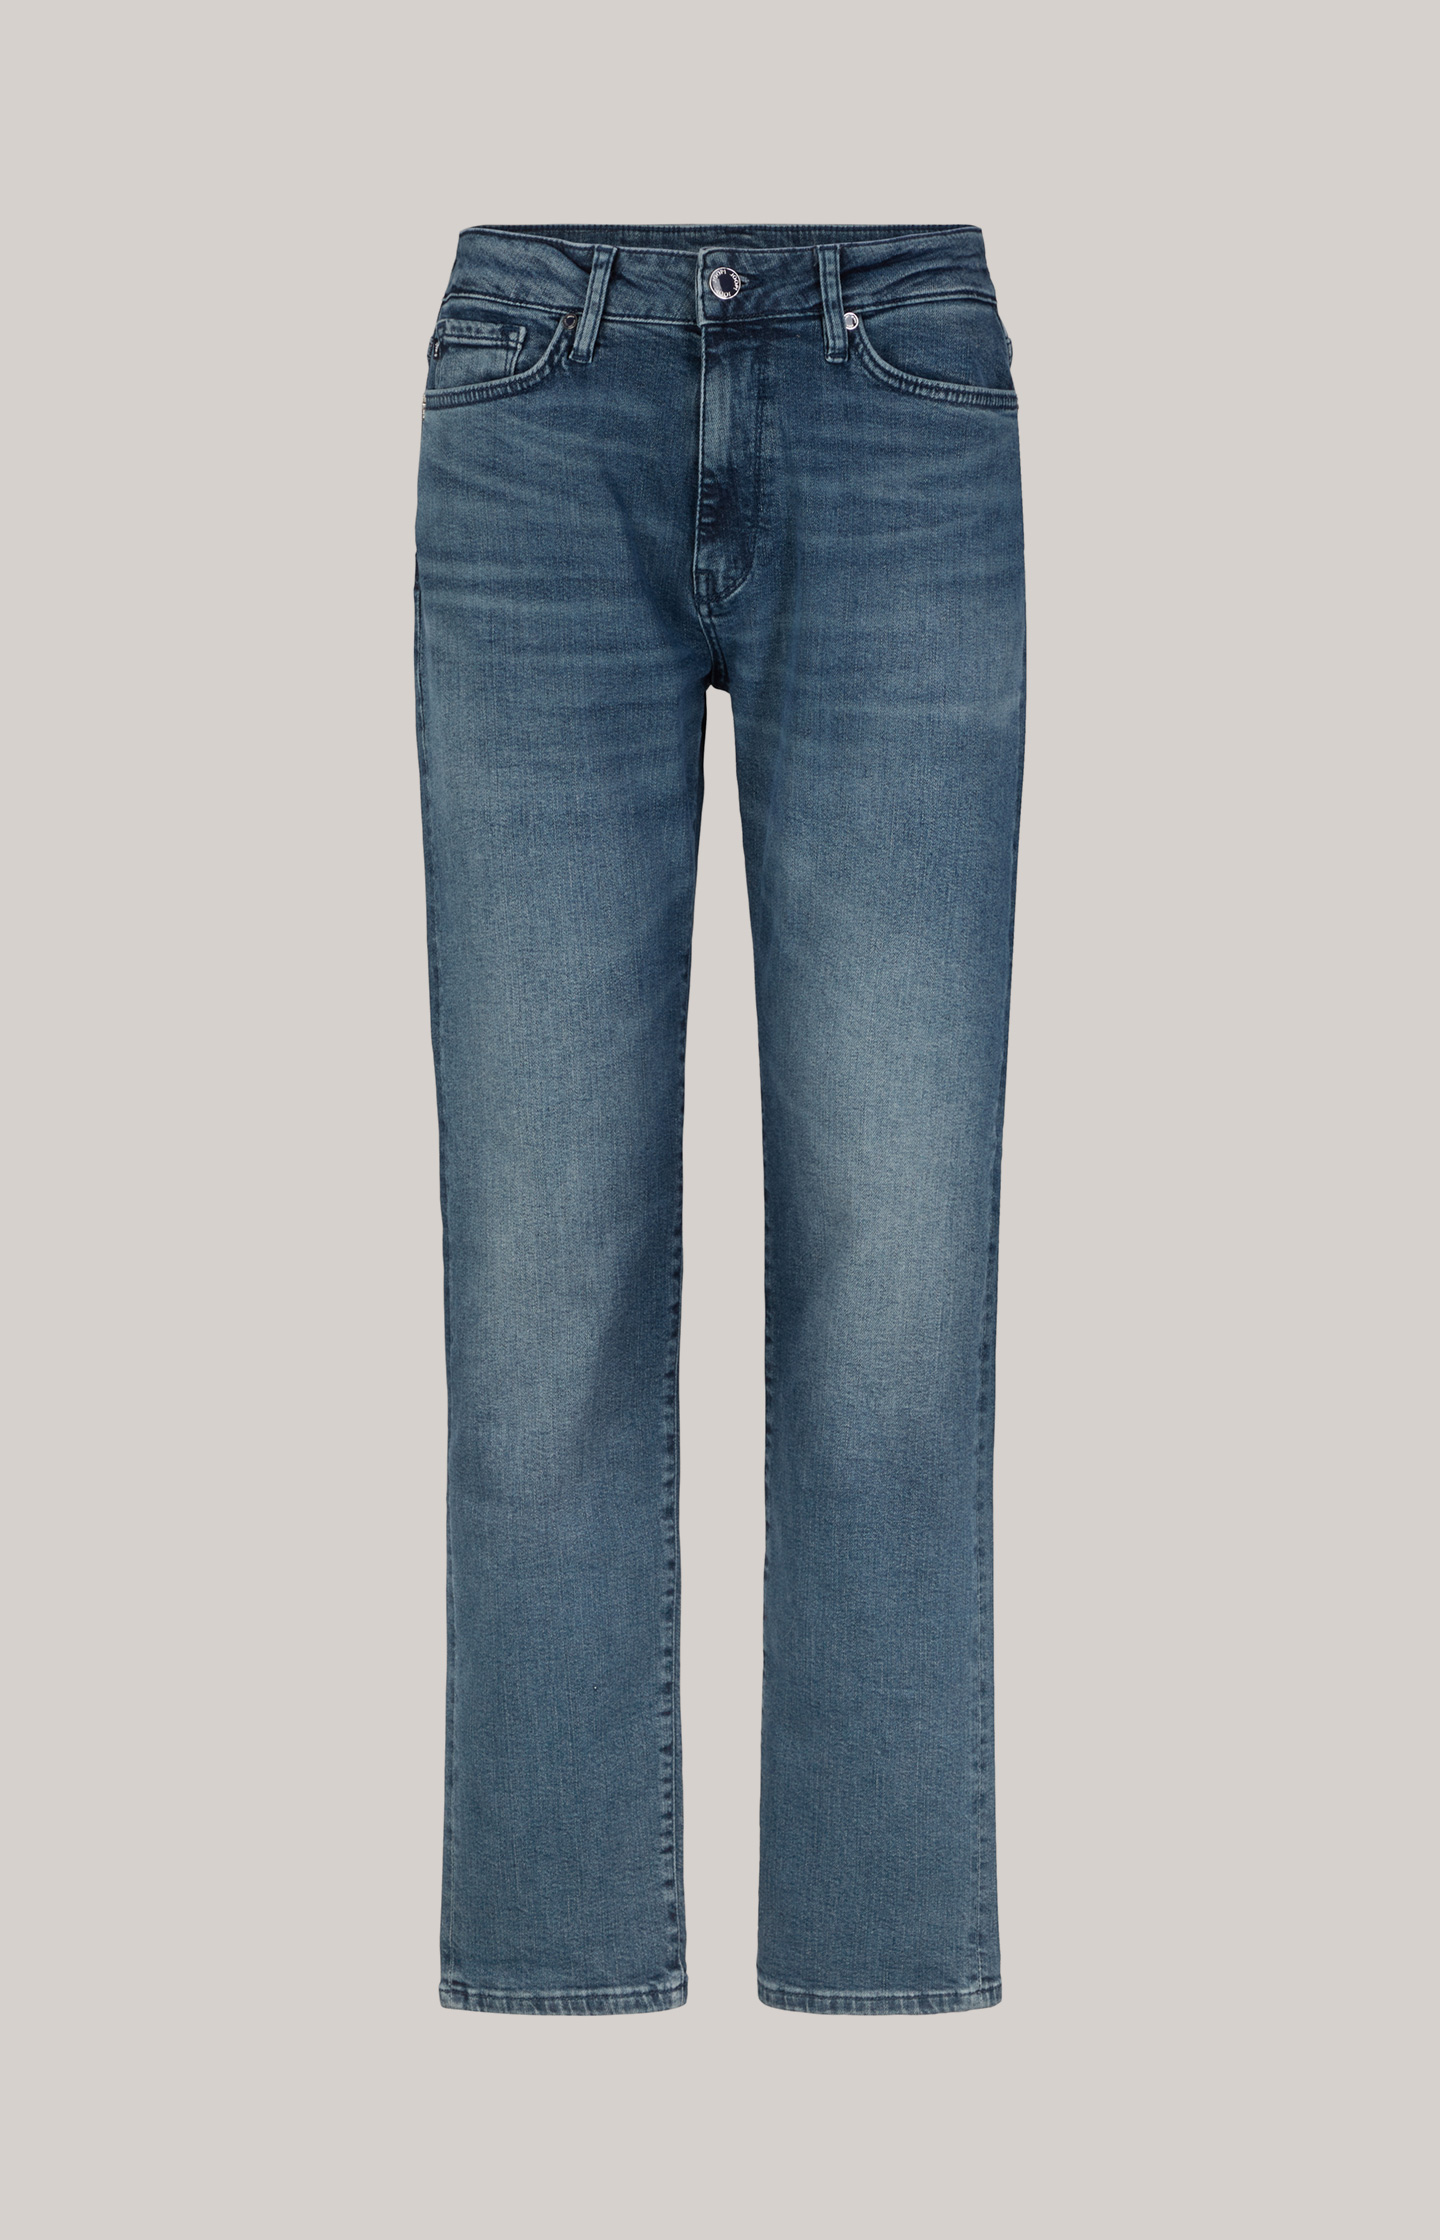 Shop Denim - in the Online in a Look Jeans Washed JOOP! Blue